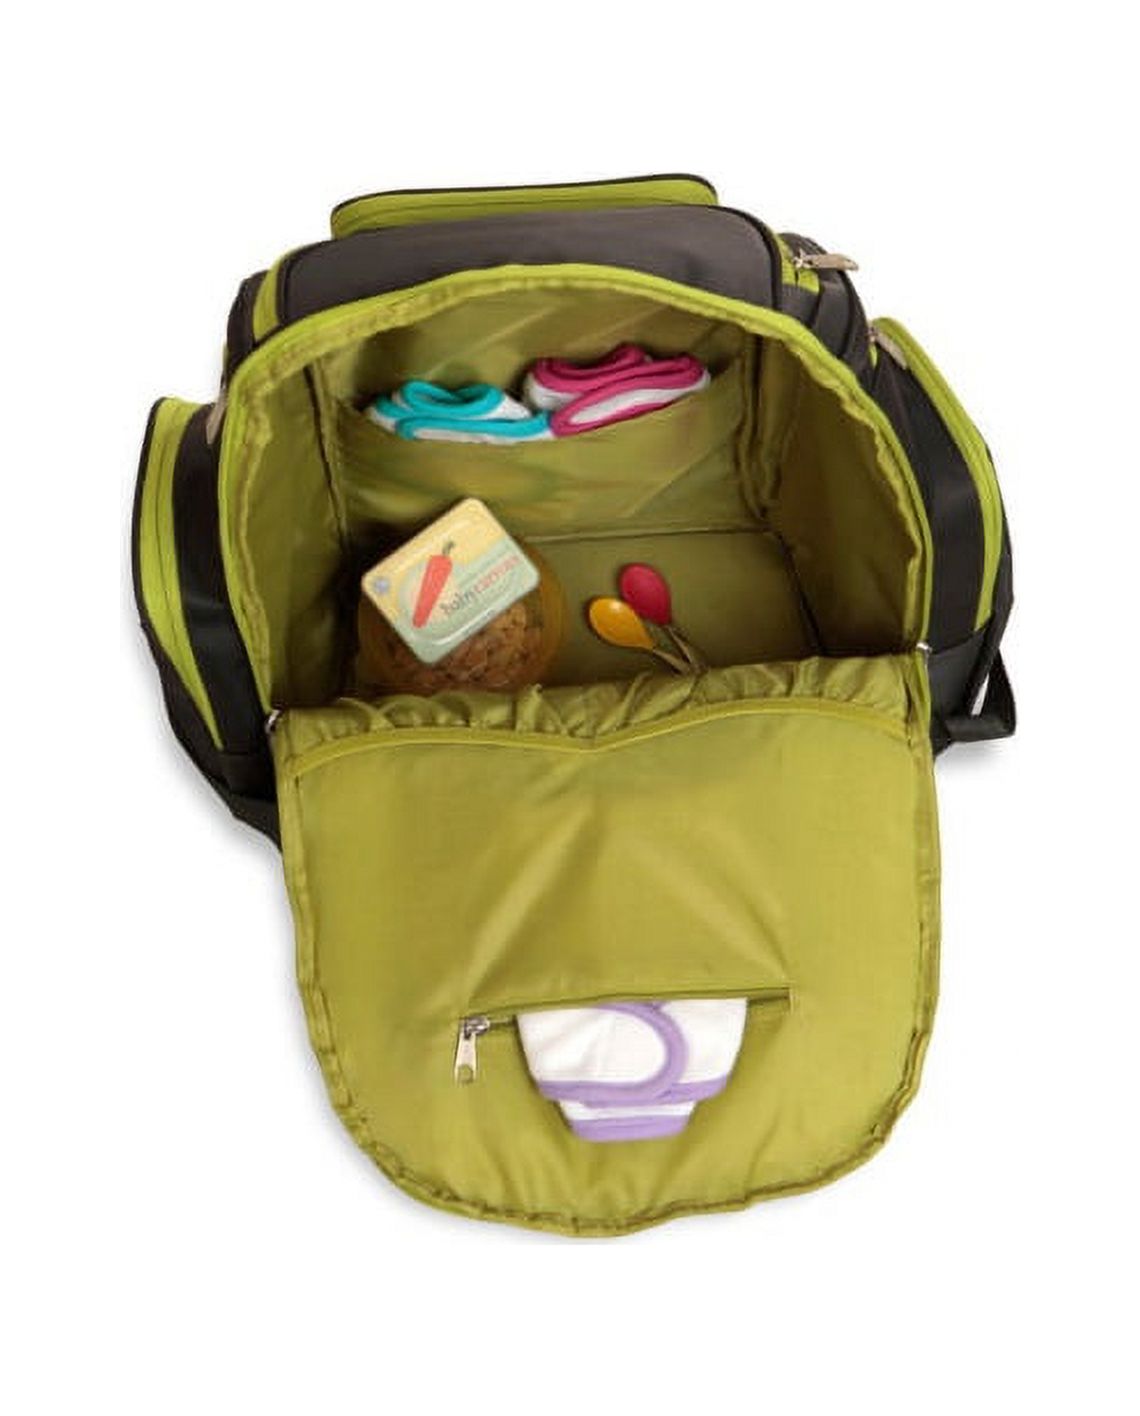 BB Gear Spaces and Places Backpack Diaper Bag, Gray - image 2 of 4